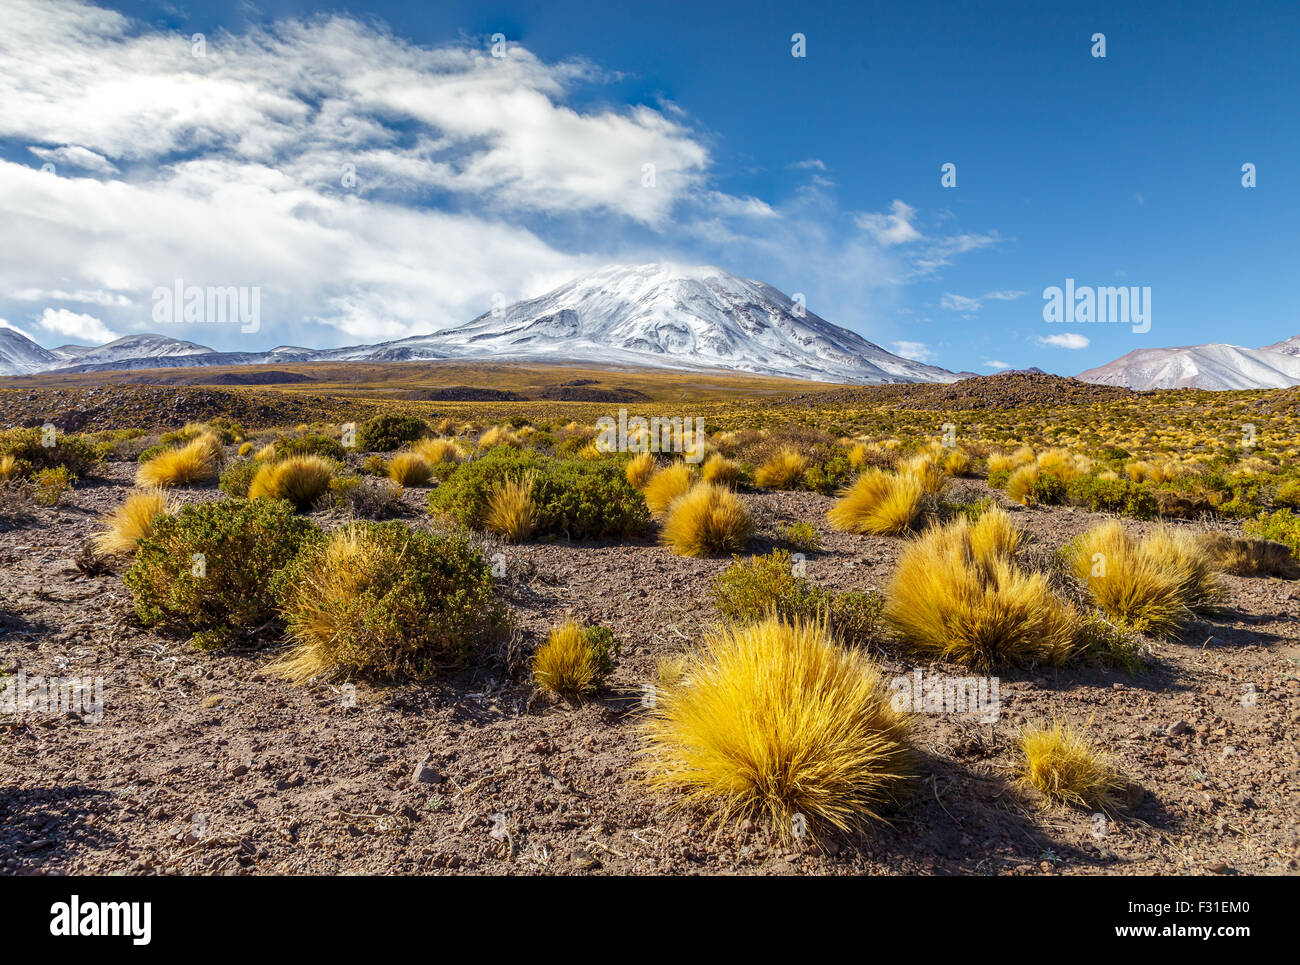 Typical vegetation of the Atacama region with volcano Lascar in the background Stock Photo